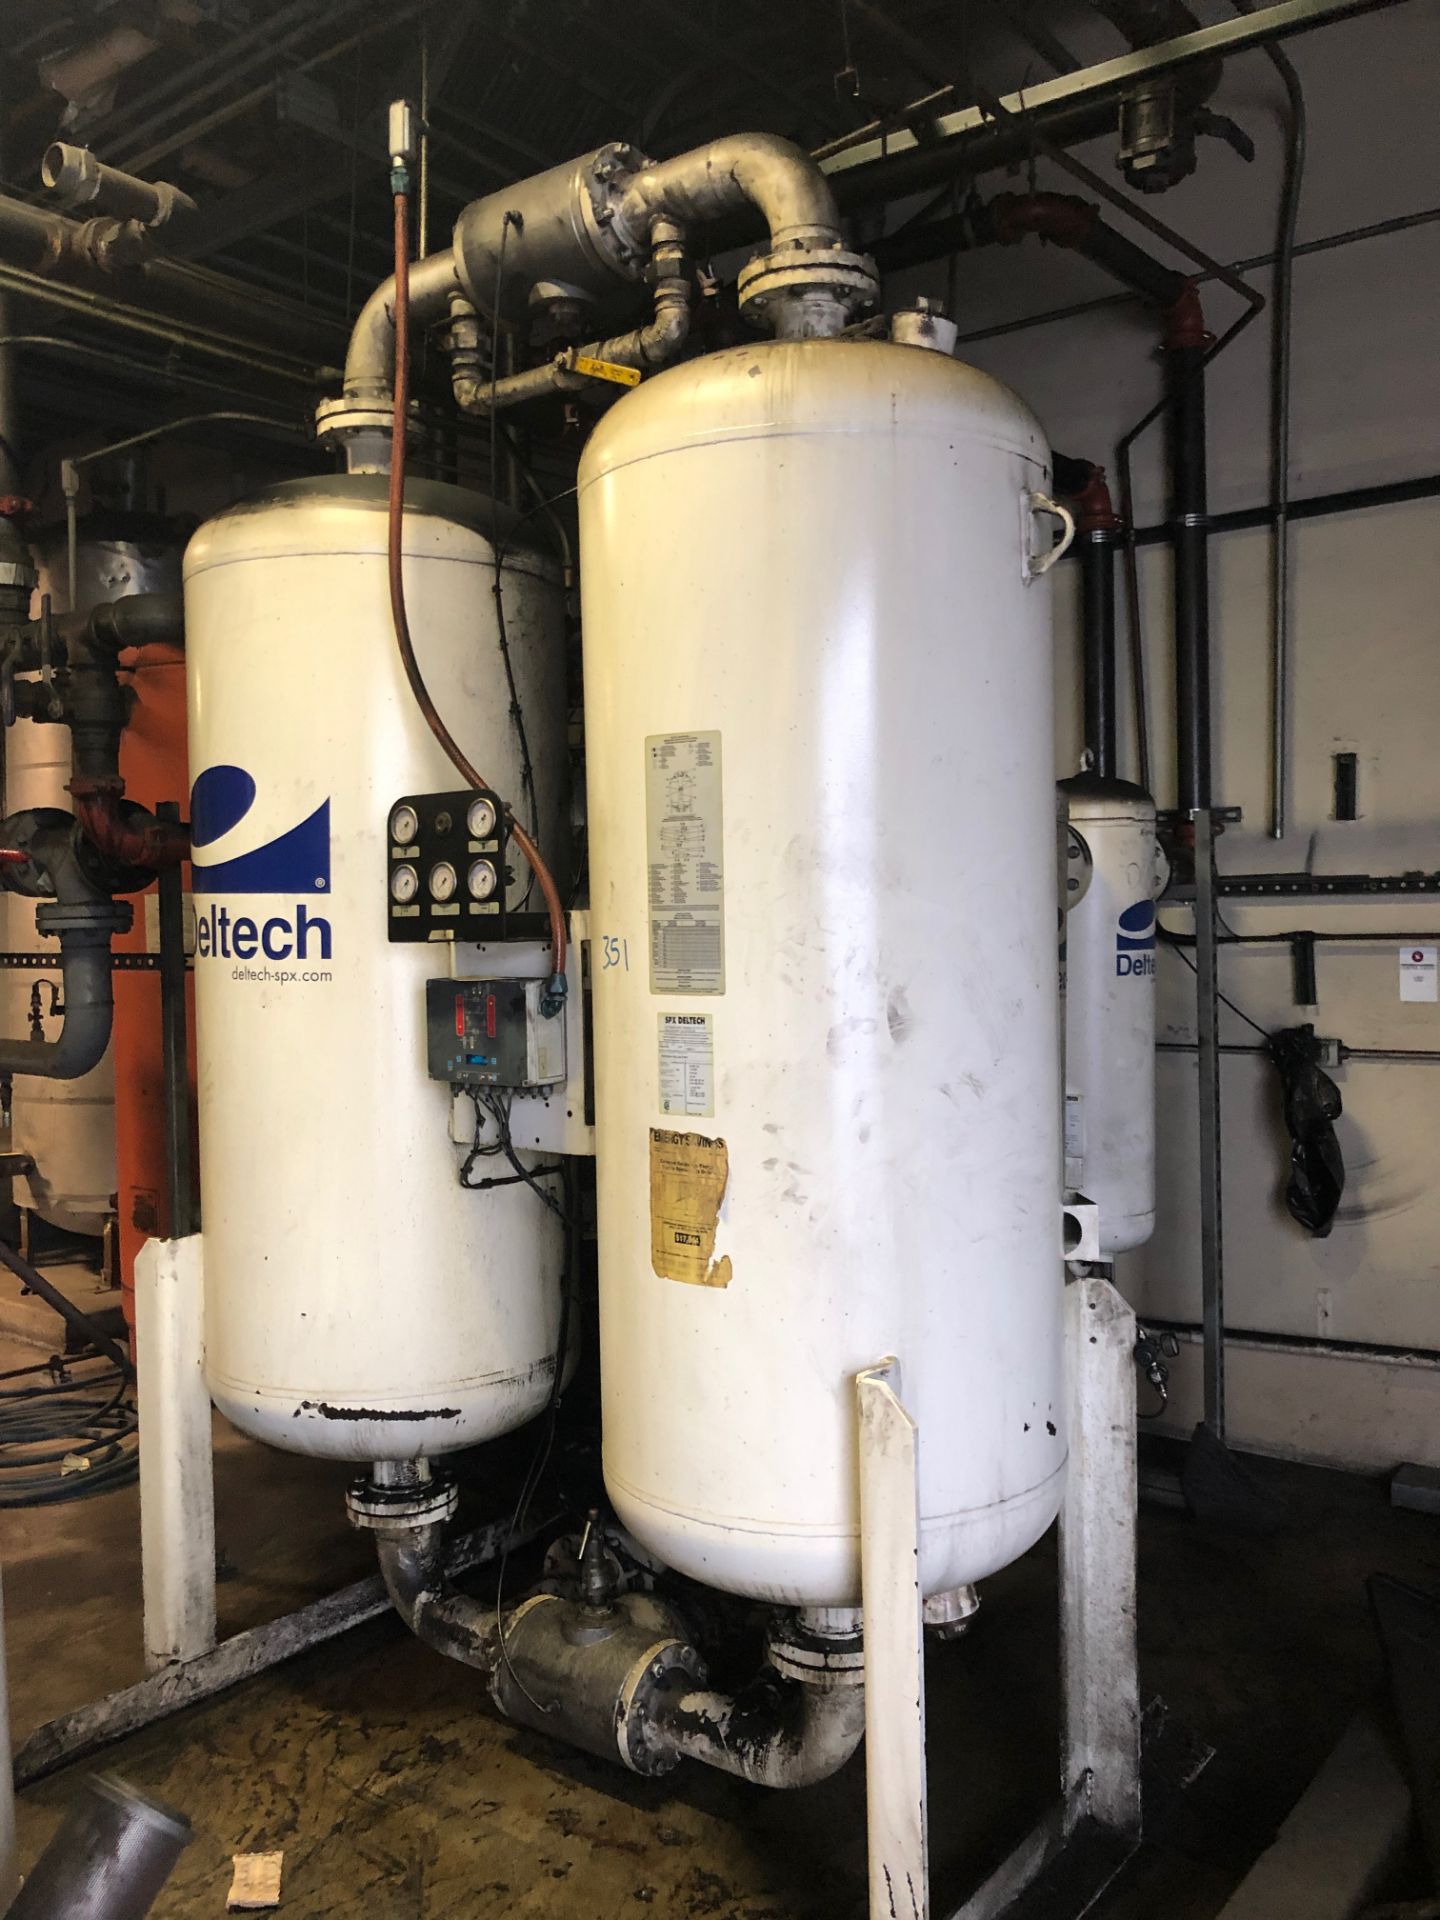 Deltech Air Dryer - Image 2 of 3